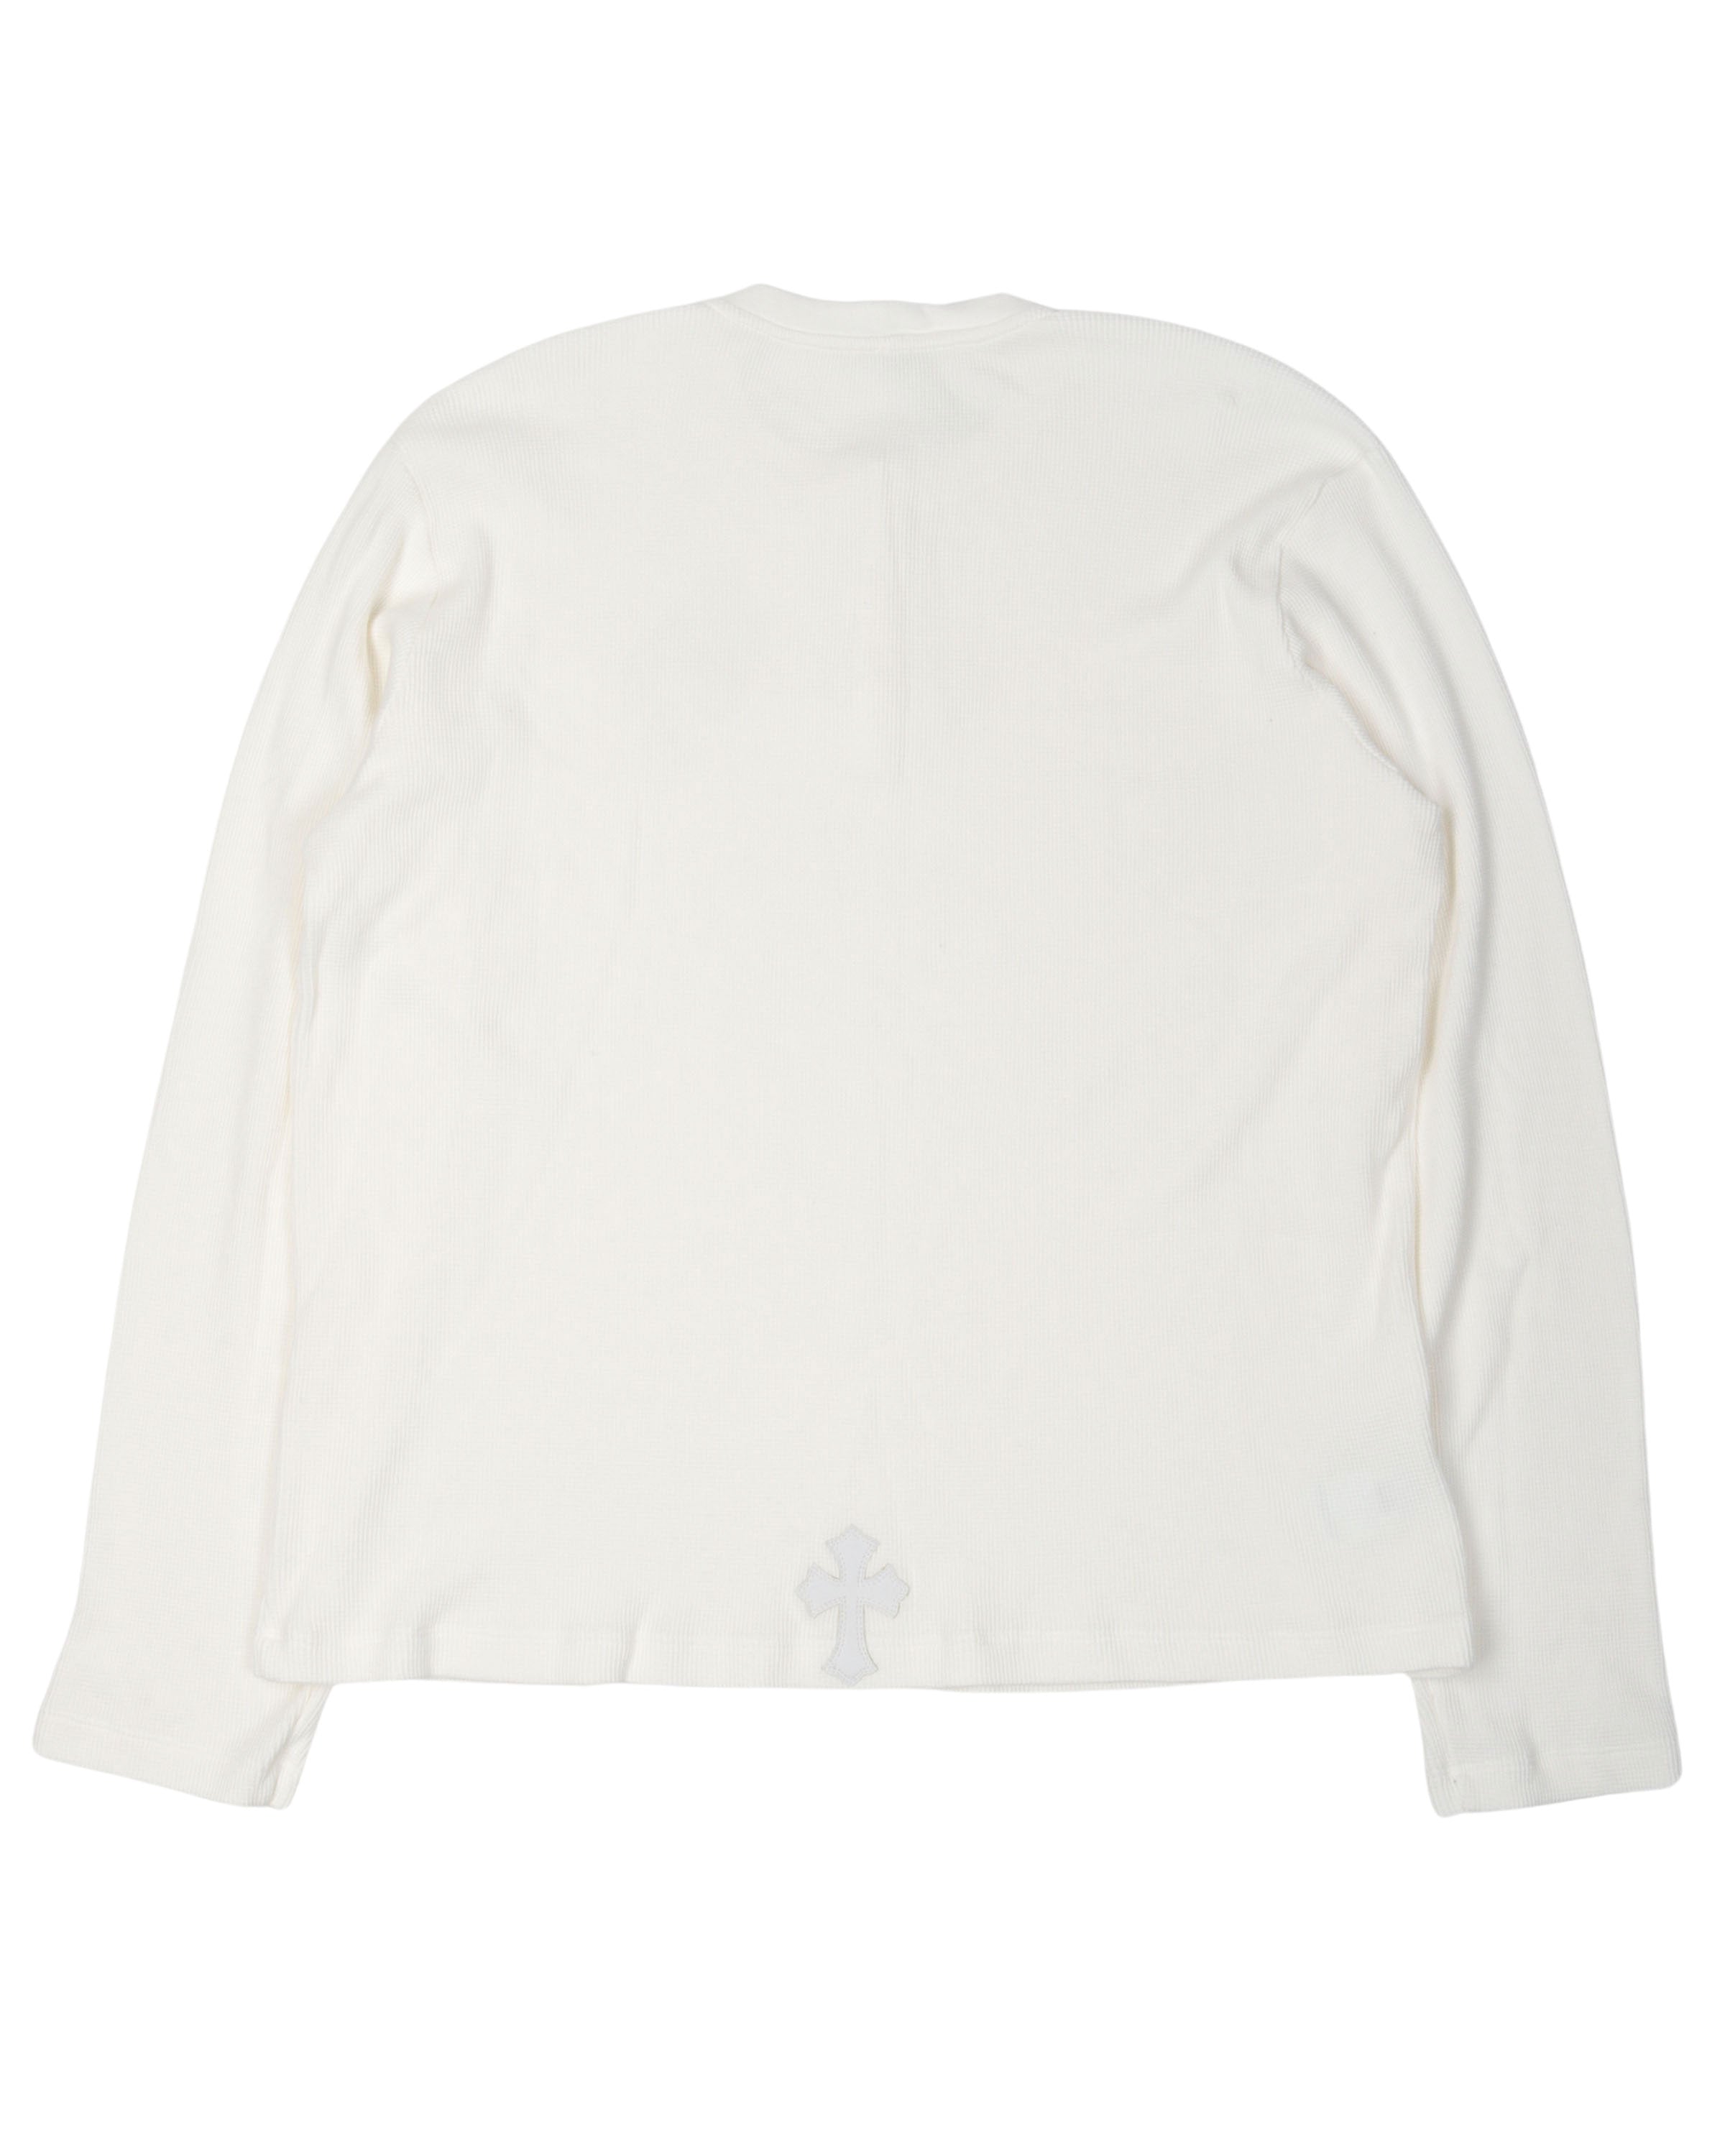 Cross Patch Thermal Long Sleeve